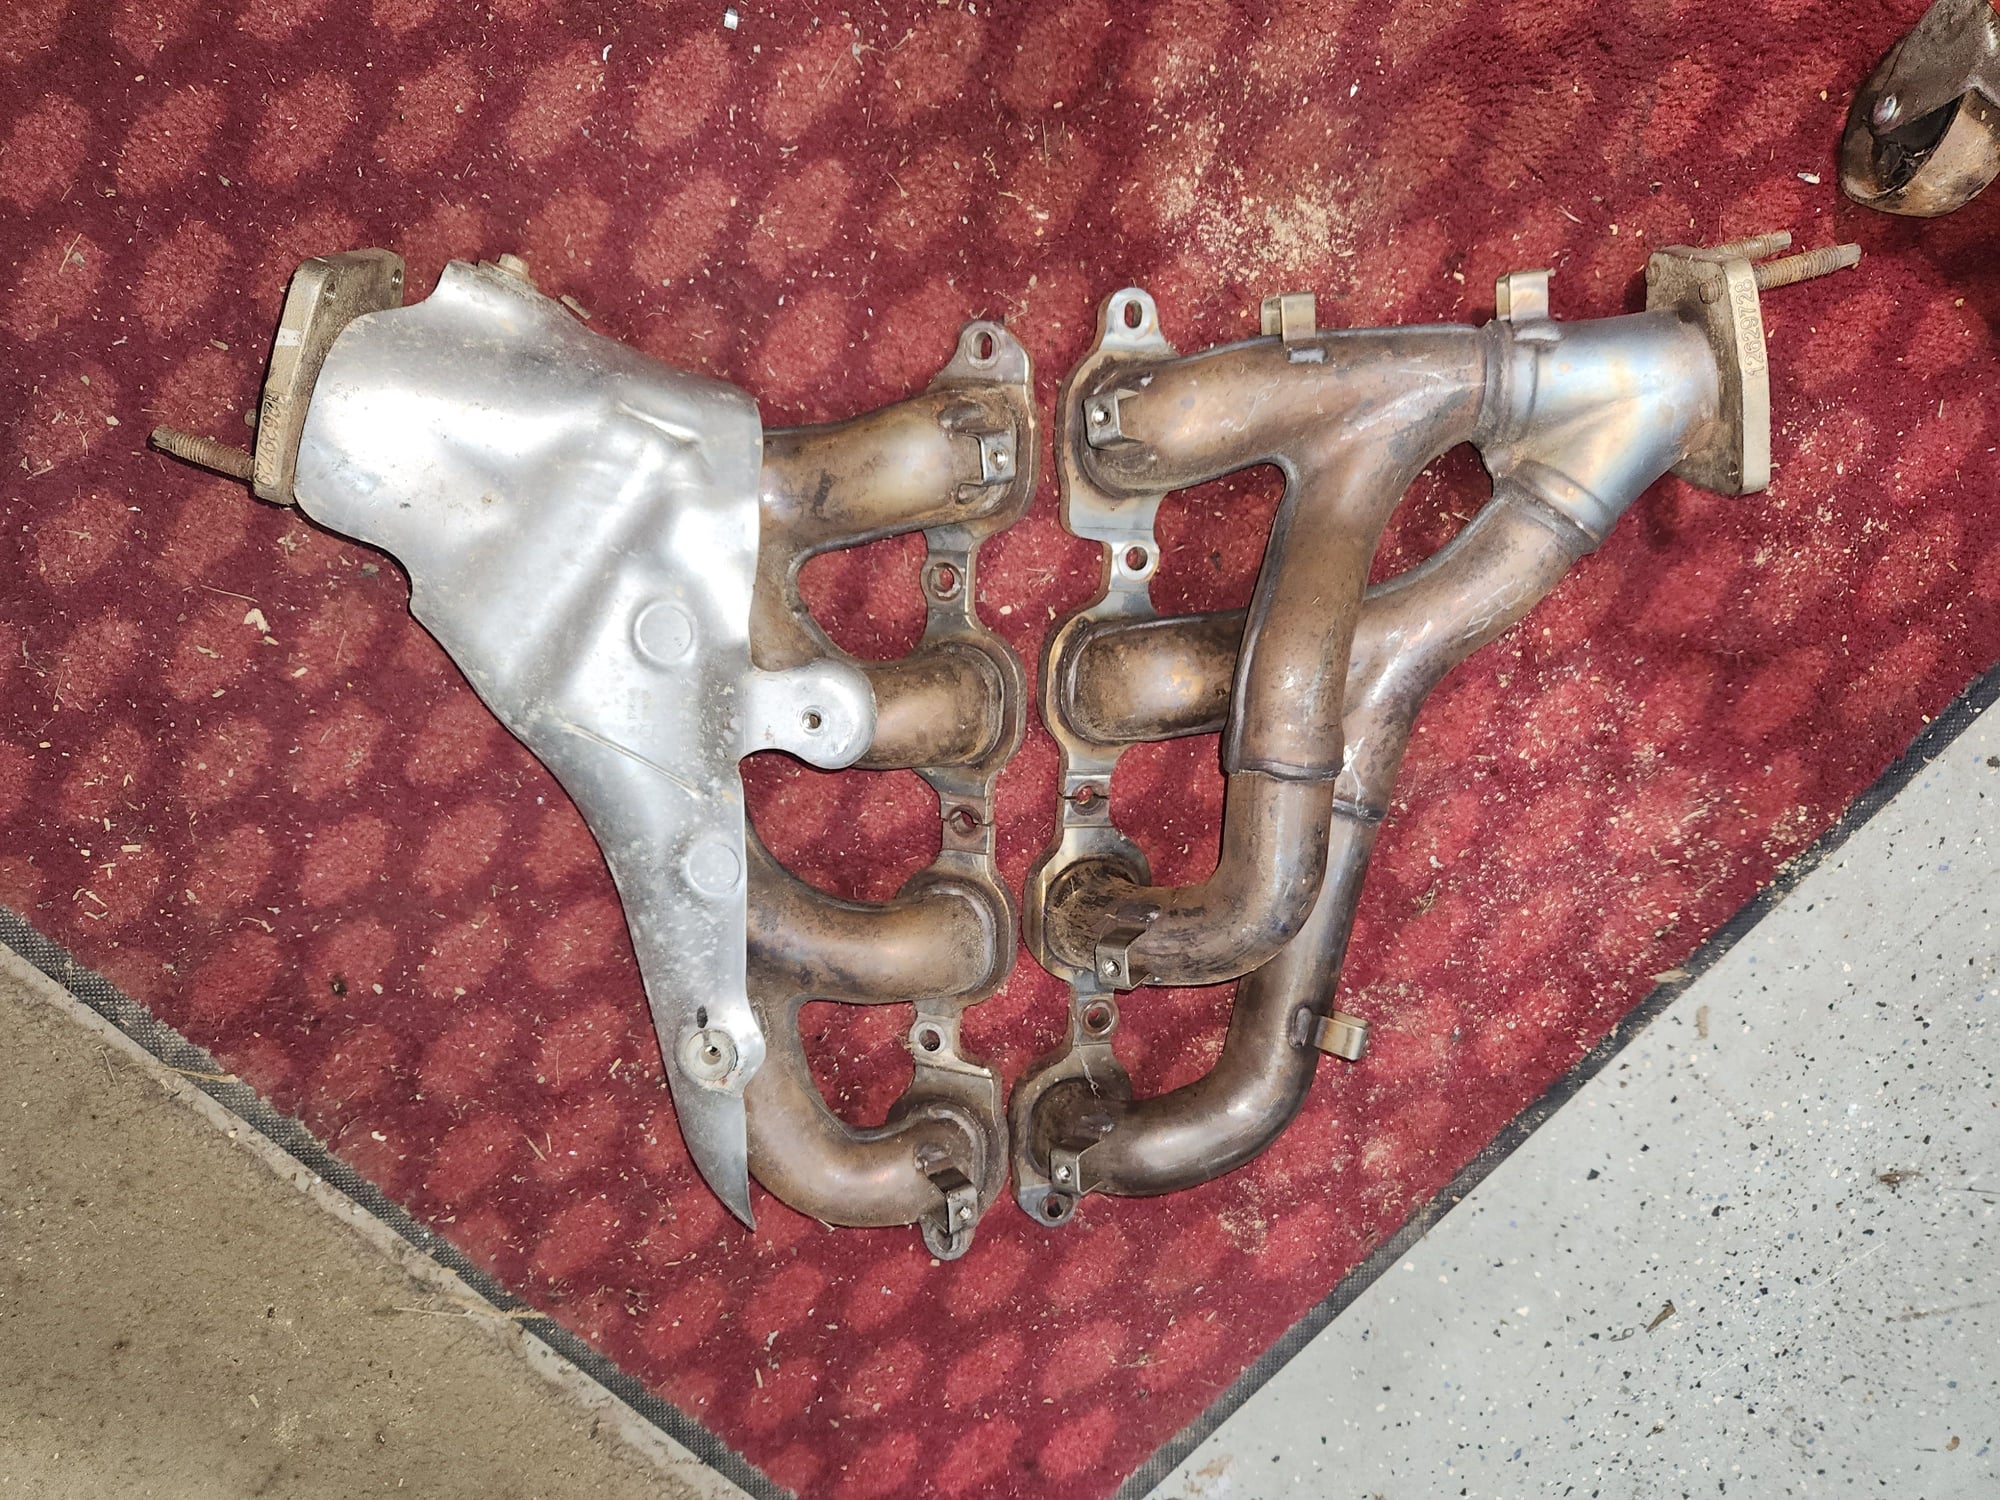 Engine - Exhaust - 2017 Camaro SS exhaust manifolds. - Used - 2016 to 2022 Chevrolet Camaro - Erie, PA 16510, United States